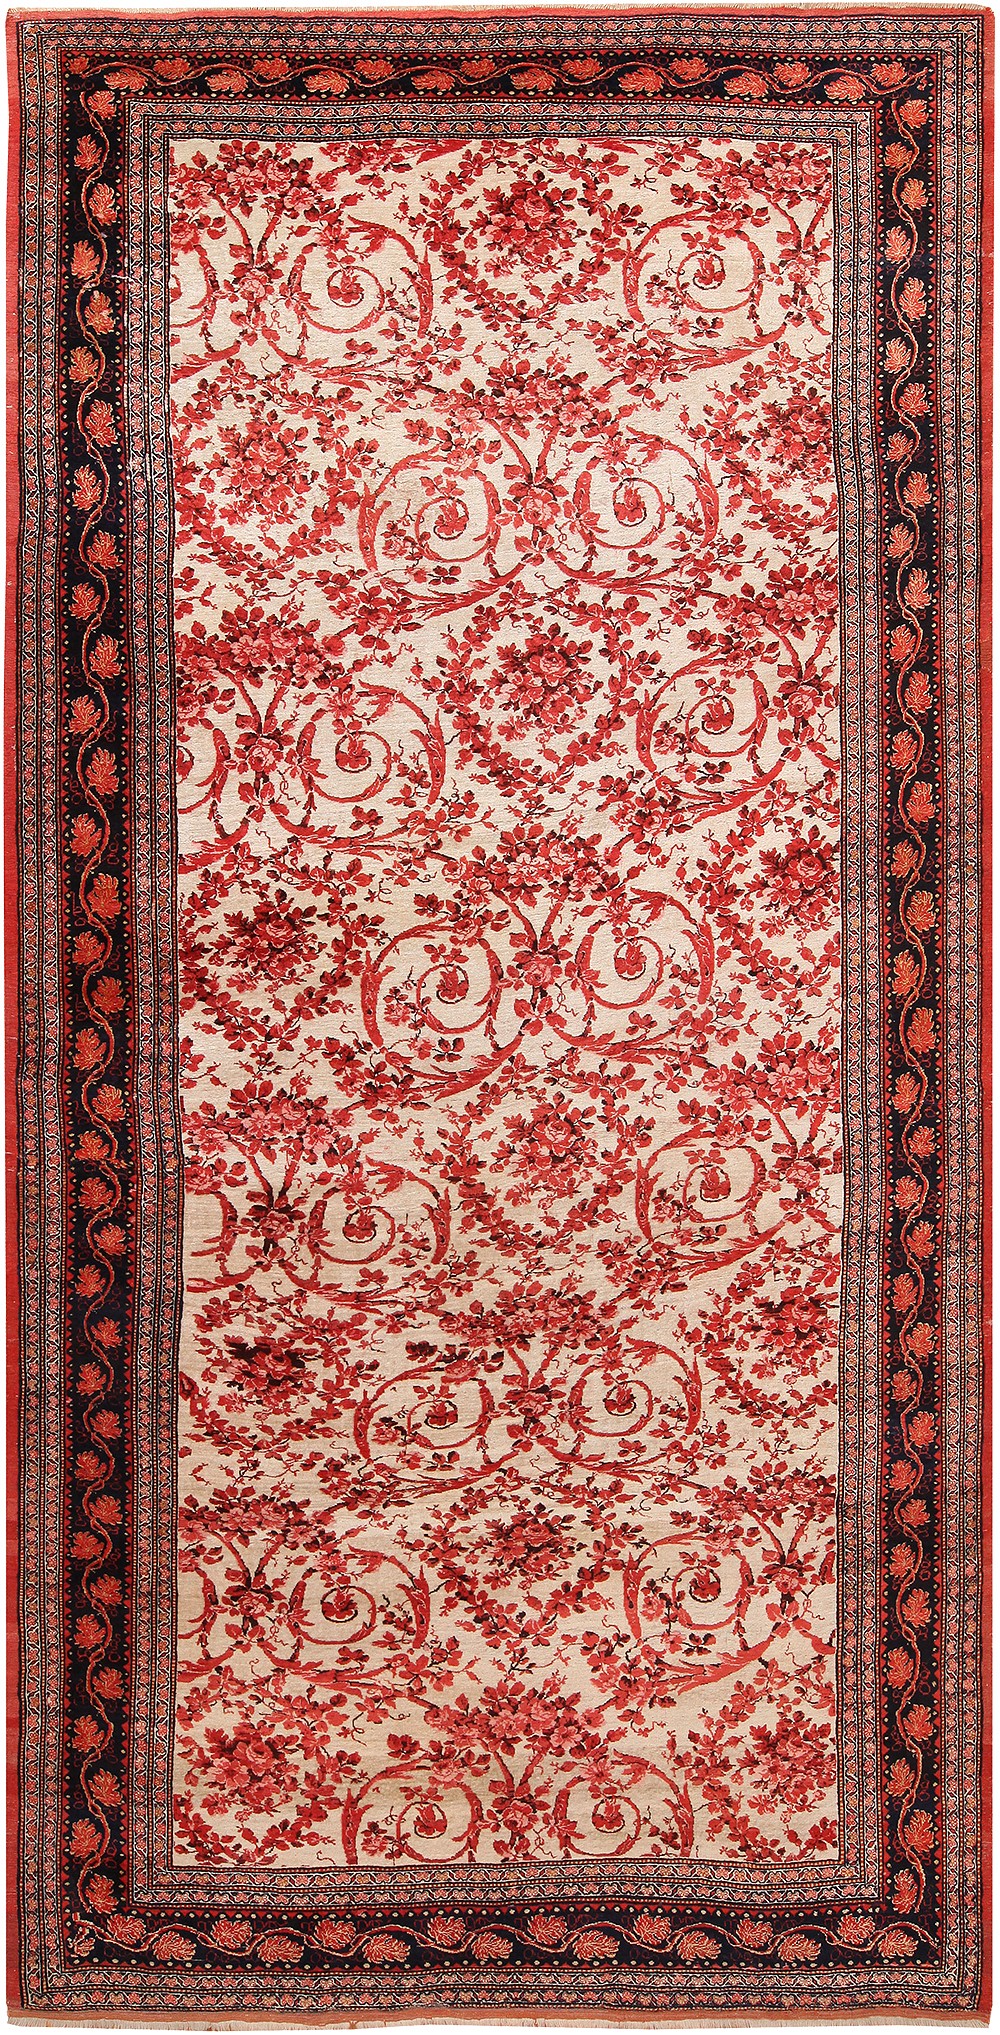 THURSDAY JAN 21ST 6PM SELECTED COLLECTION OF VINTAGE AND ANTIQUE RUGS FROM VARIOUS ESTATES by Nazmiyal Auction